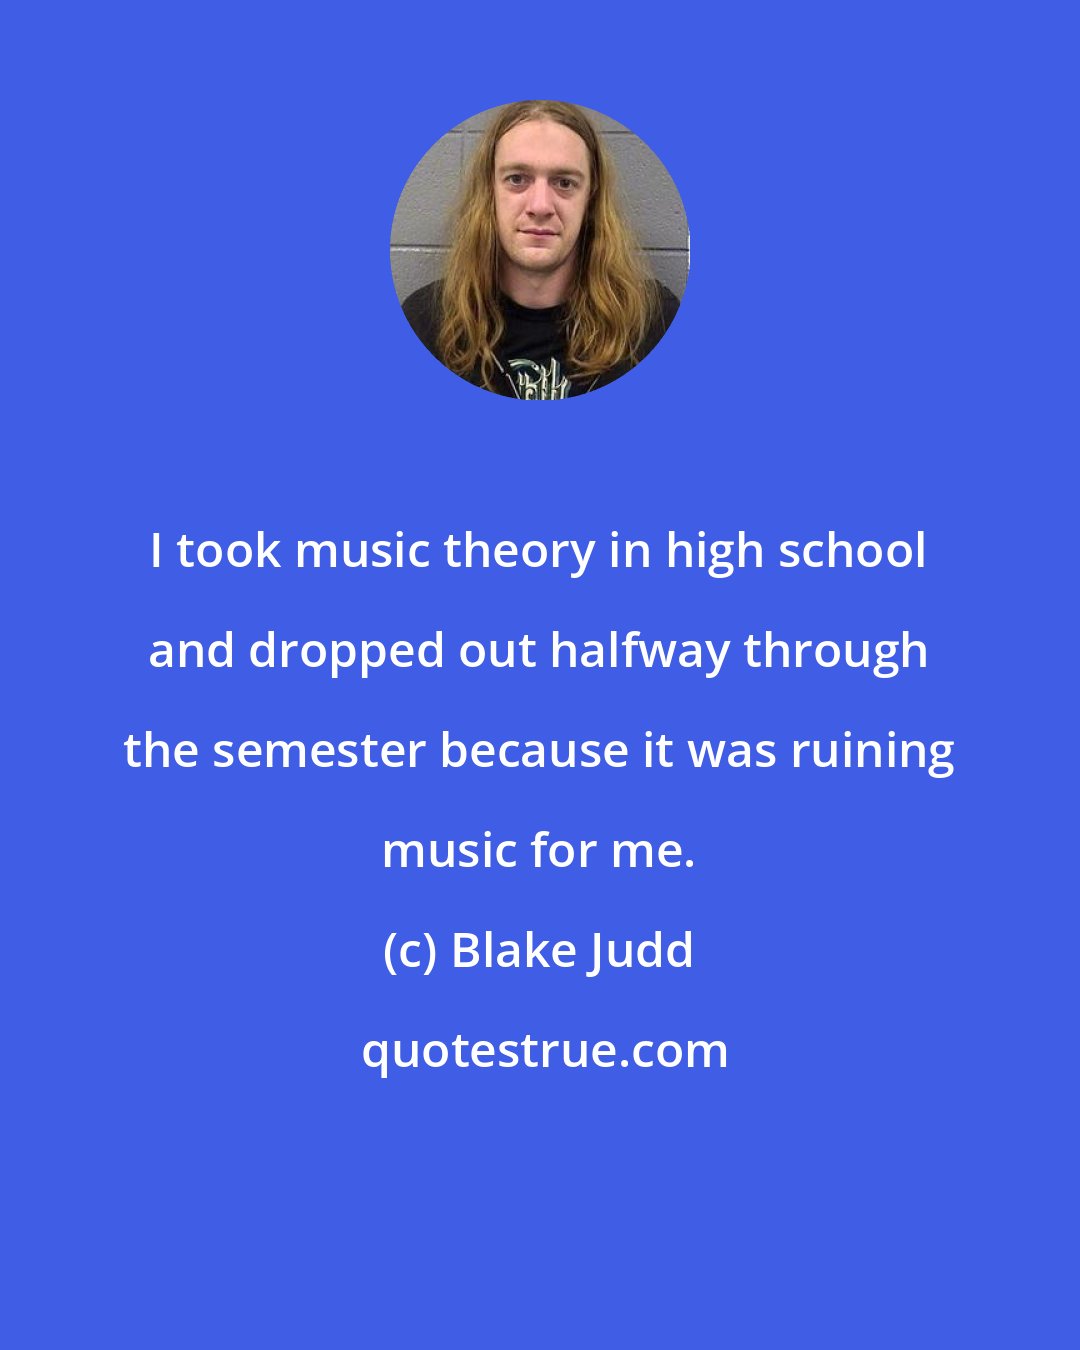 Blake Judd: I took music theory in high school and dropped out halfway through the semester because it was ruining music for me.